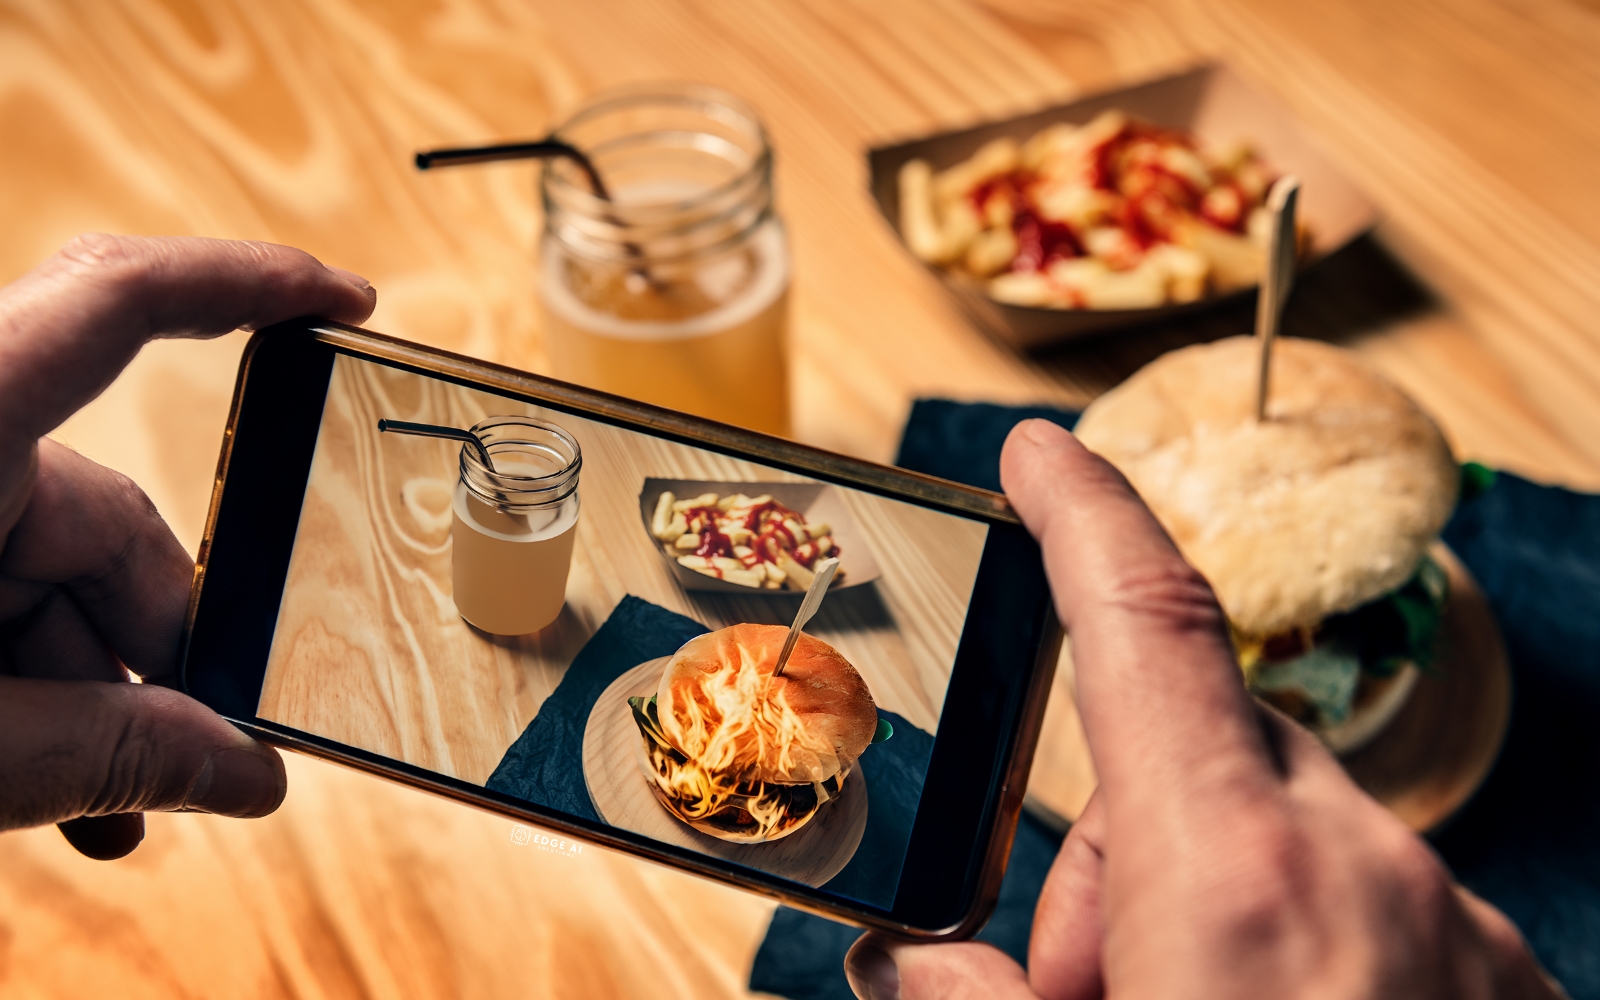 DineAR Augmented Reality Restaurant Experience